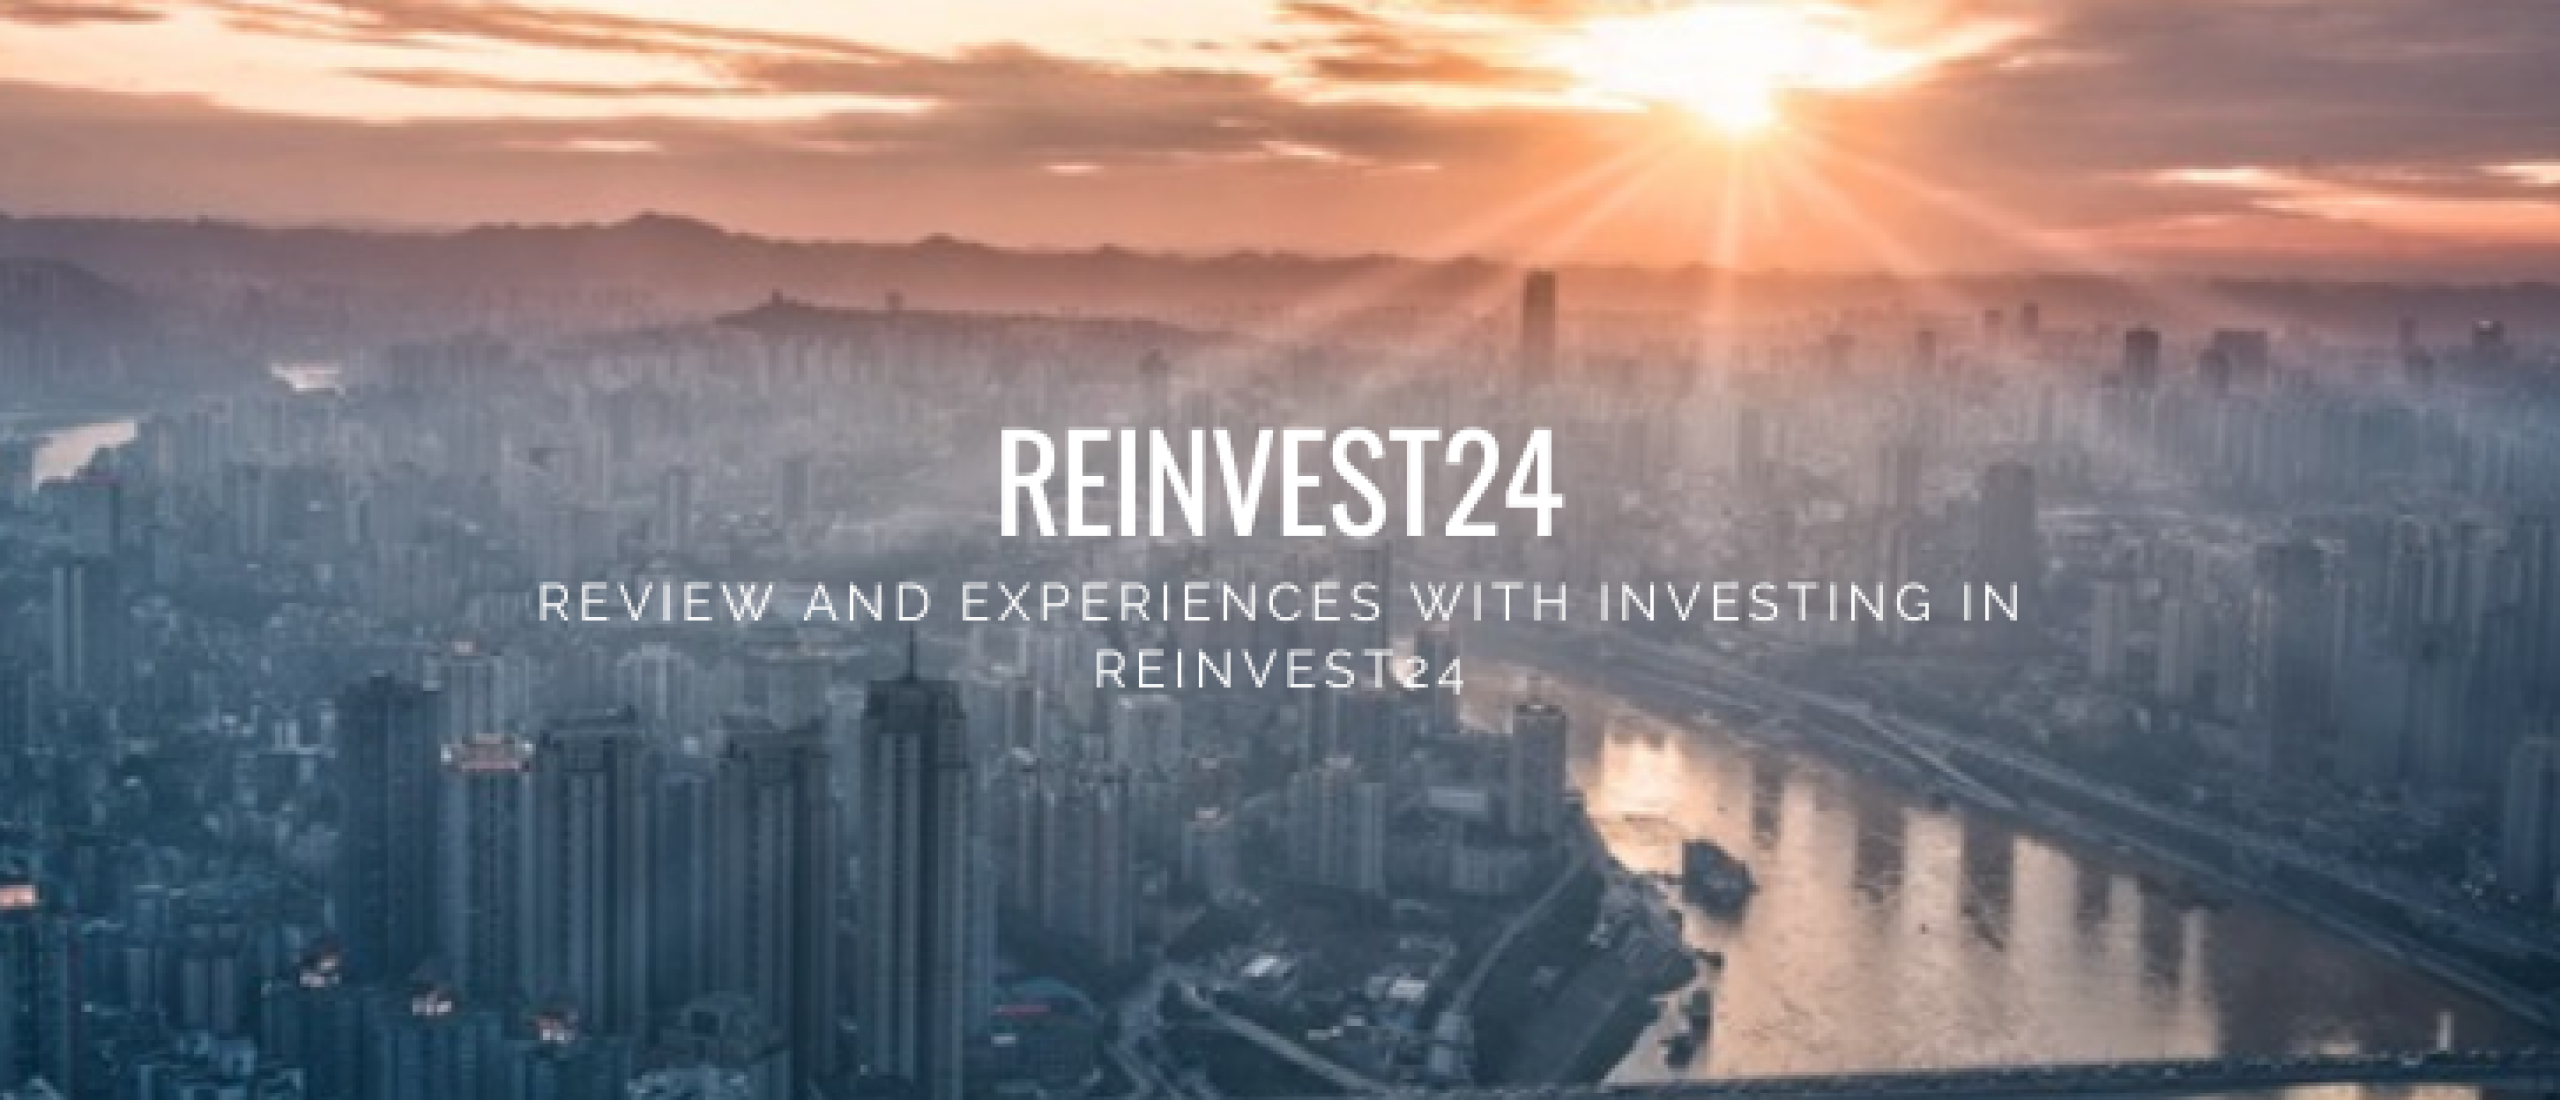 Reinvest24 Review and Experiences with Investing | Happy Investors